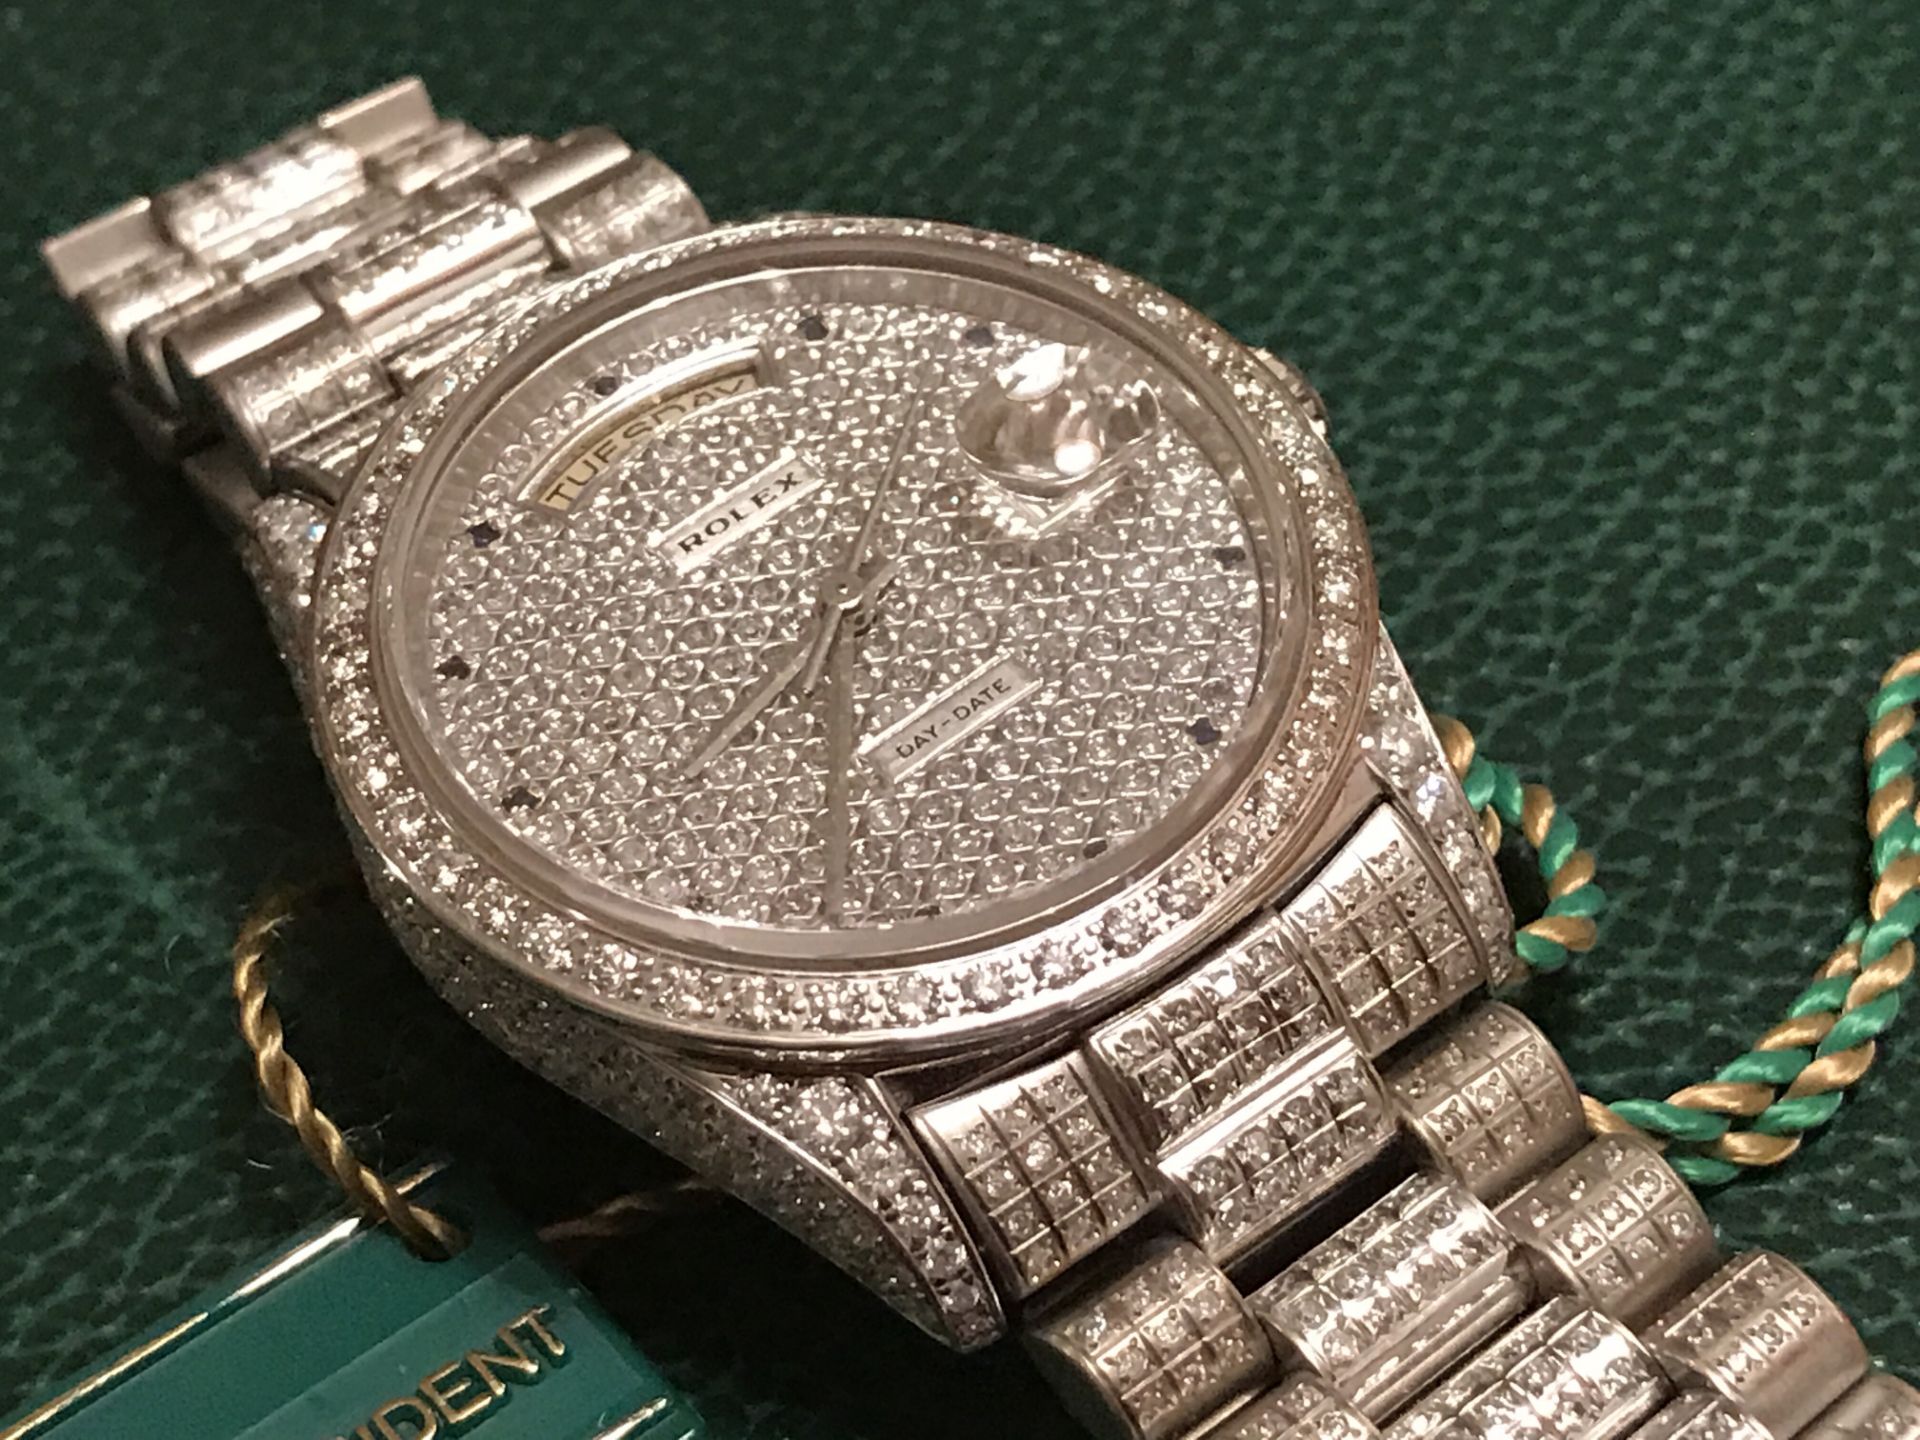 Mens Solid White Gold Diamond/ Sapphire Day-Date “Super President” Watch - Image 3 of 15